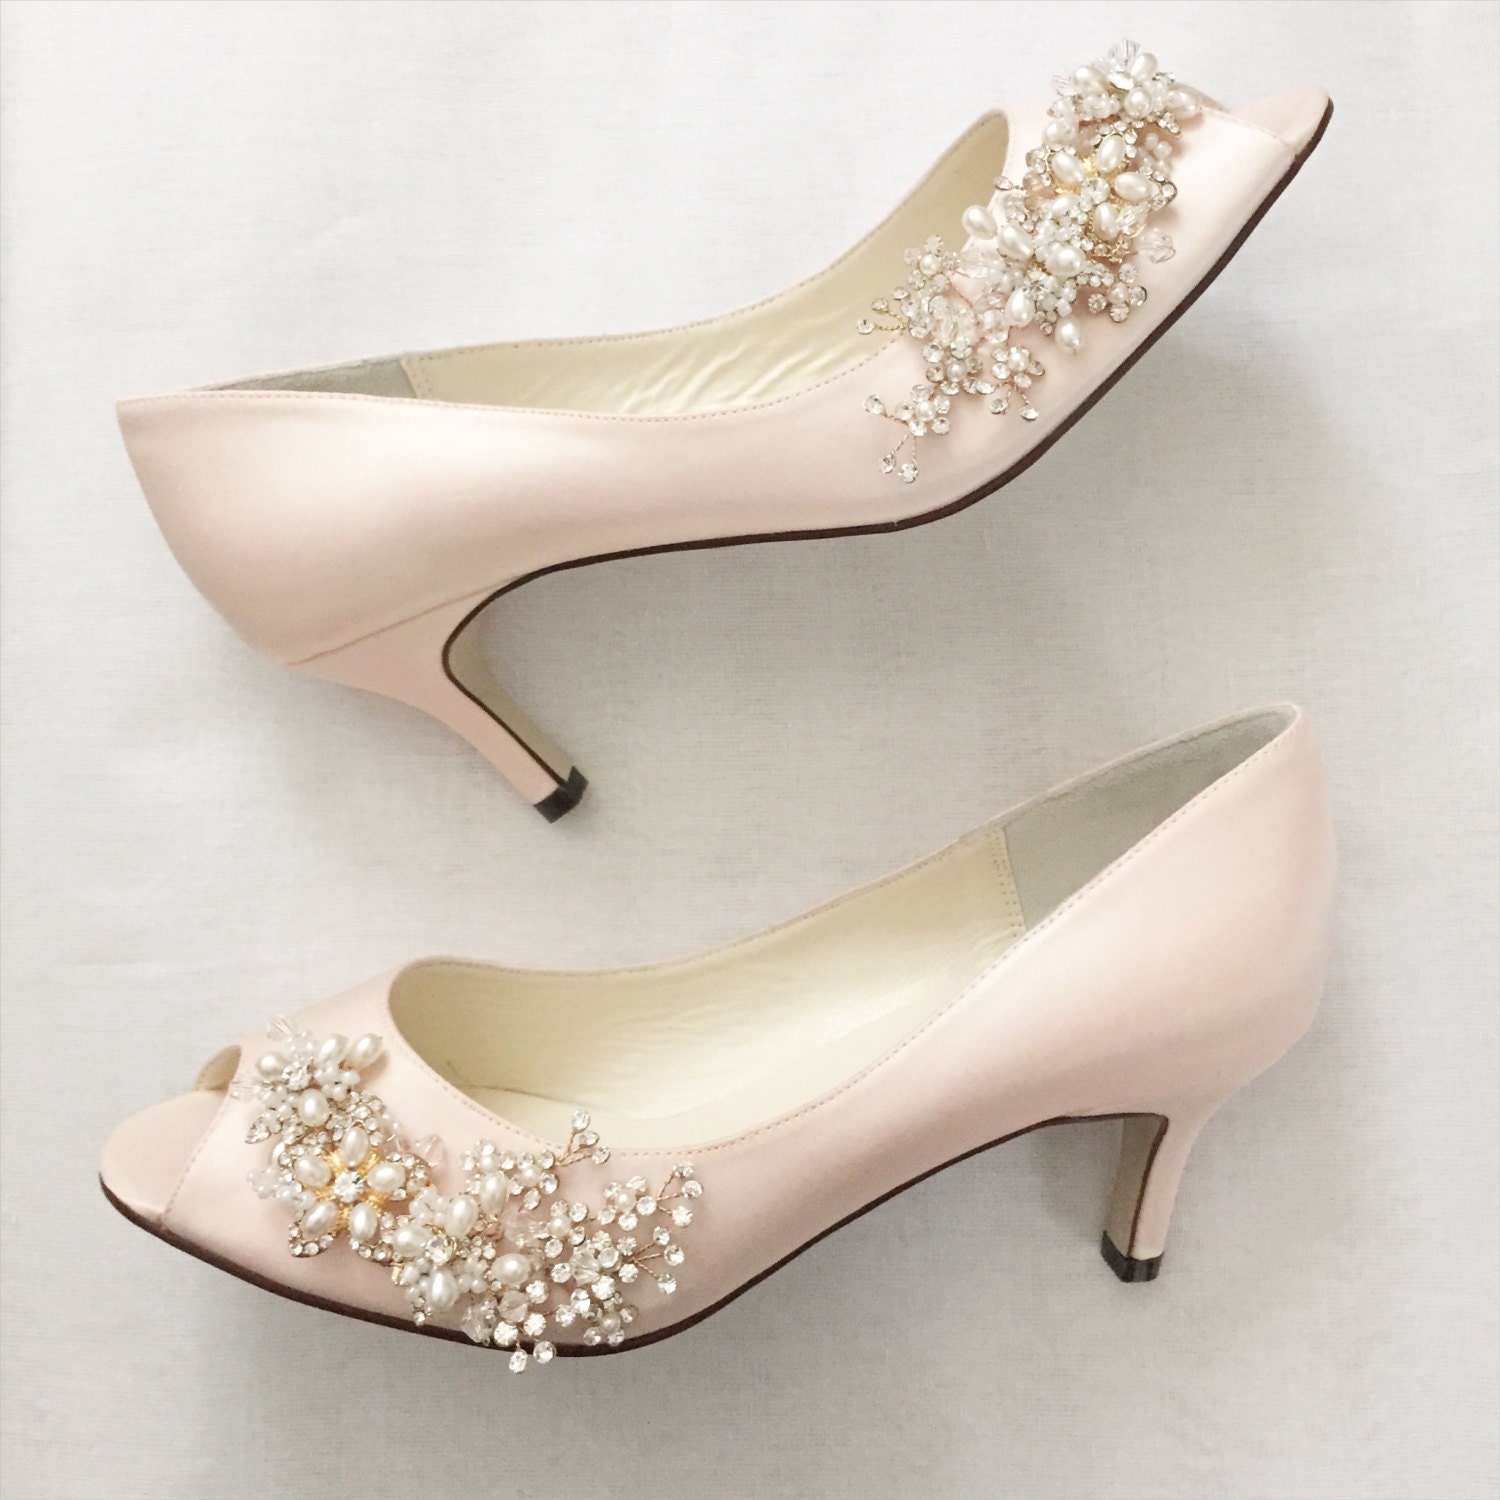 Blush Gold Wedding Shoes with Pearl and Crystal Vine Flower